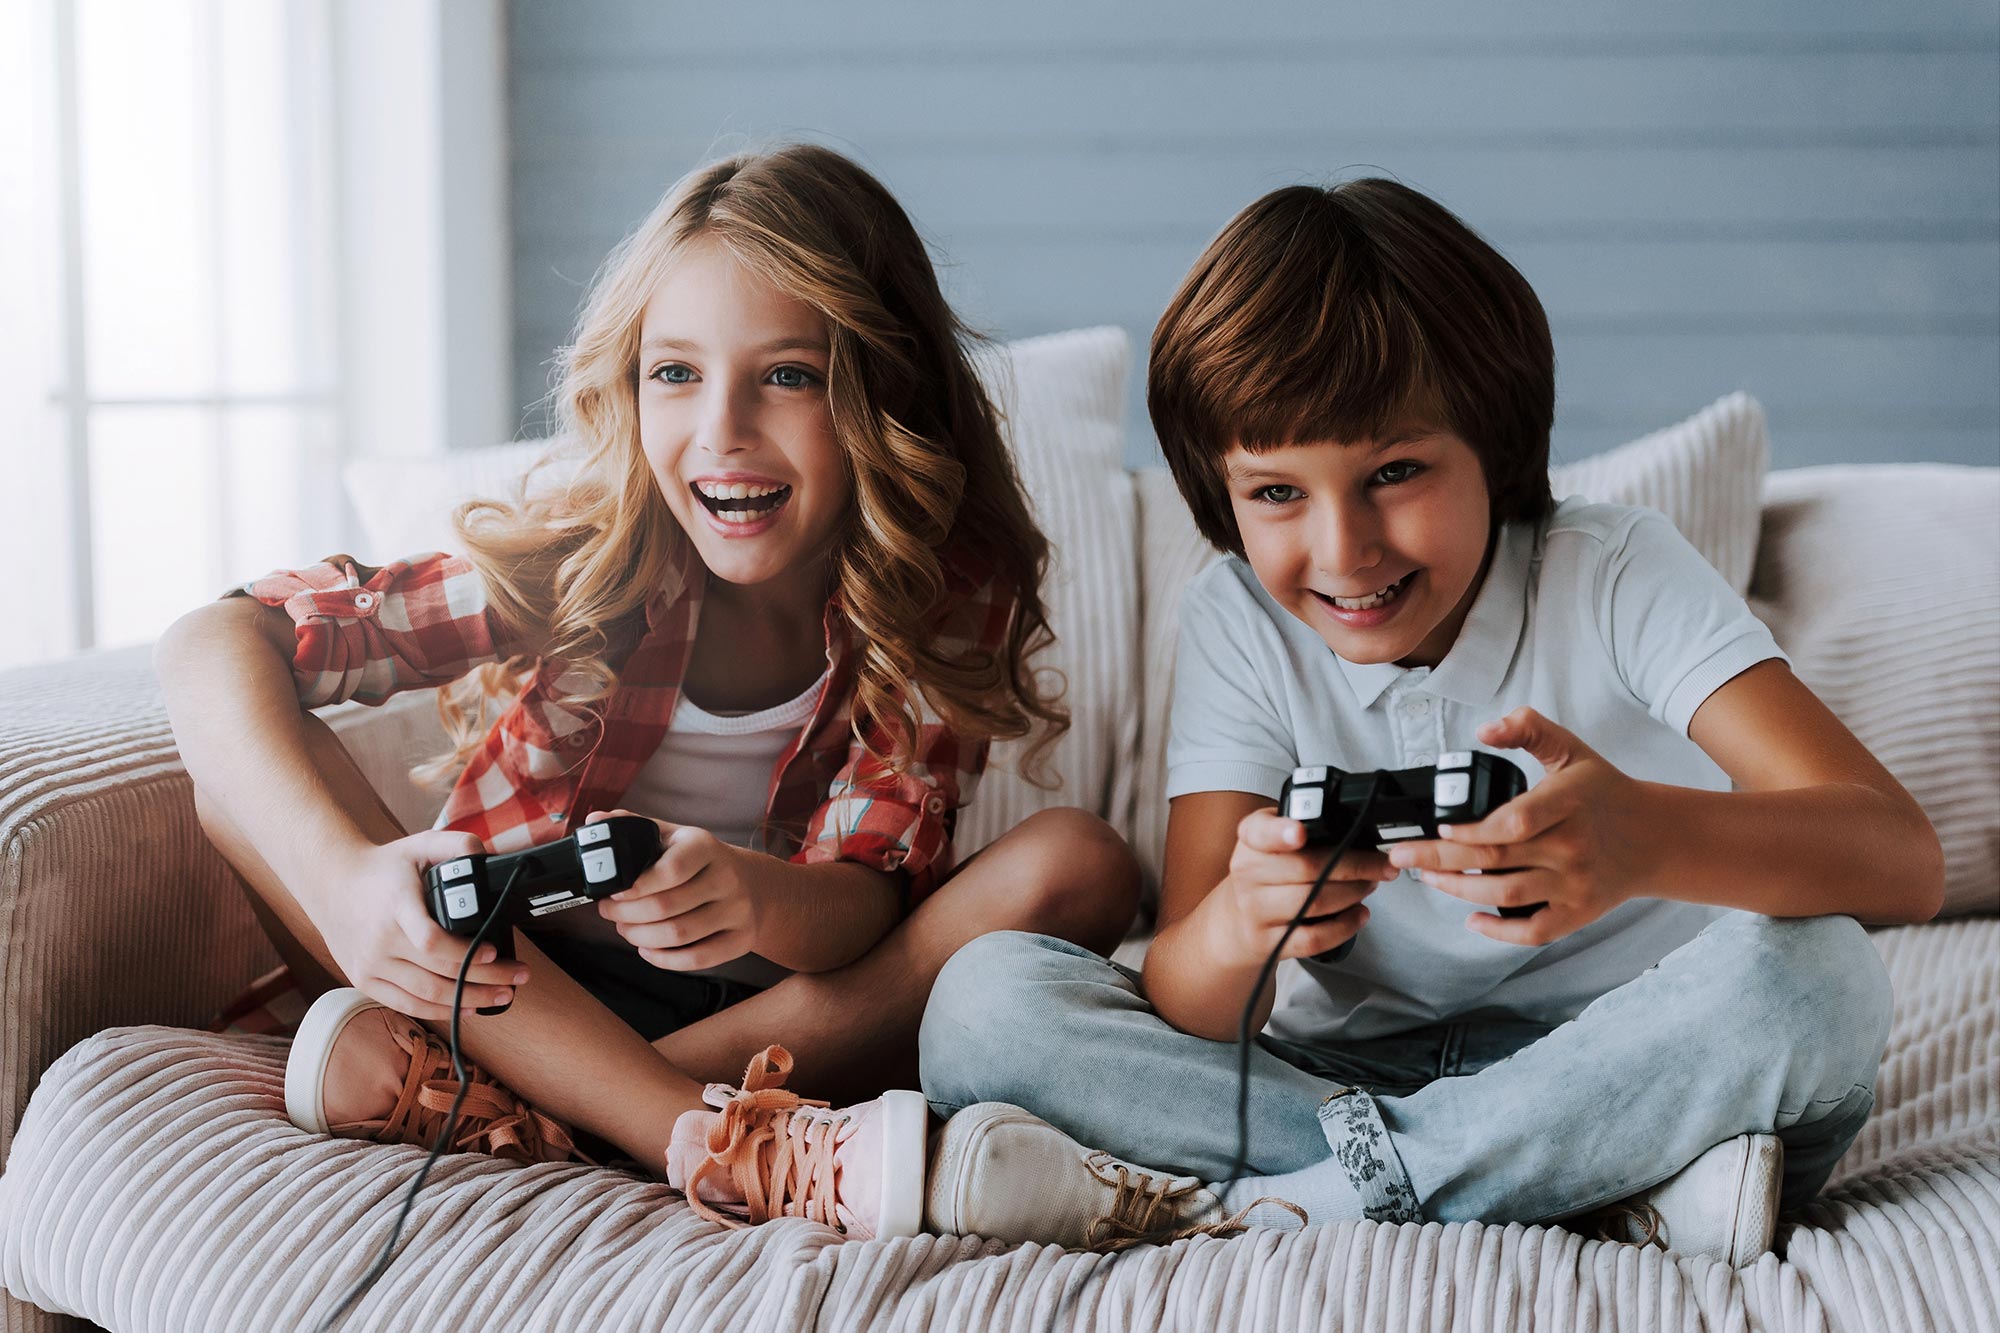 Playing Videogames Could Boost Your Child's Intelligence, Study